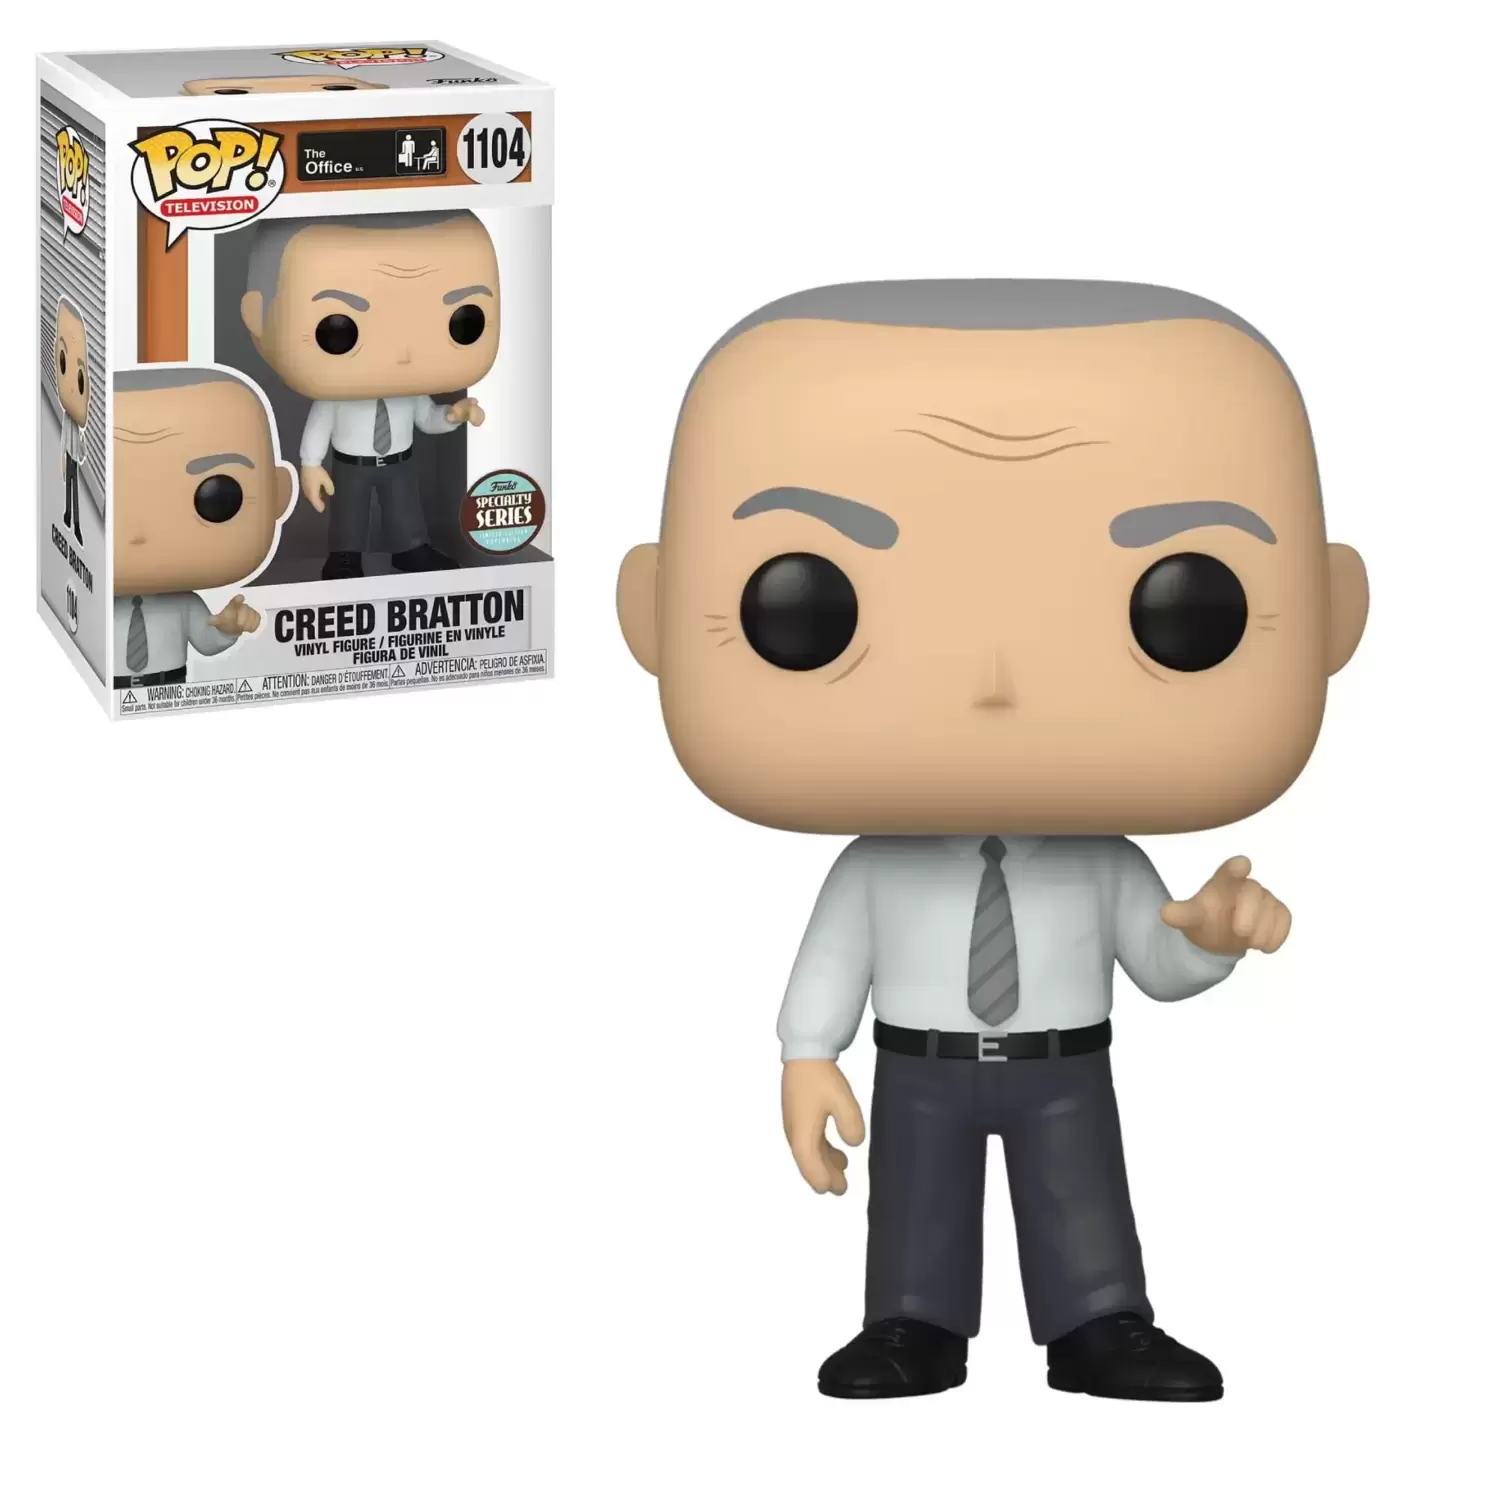 POP! Television - The Office - Creed Bratton